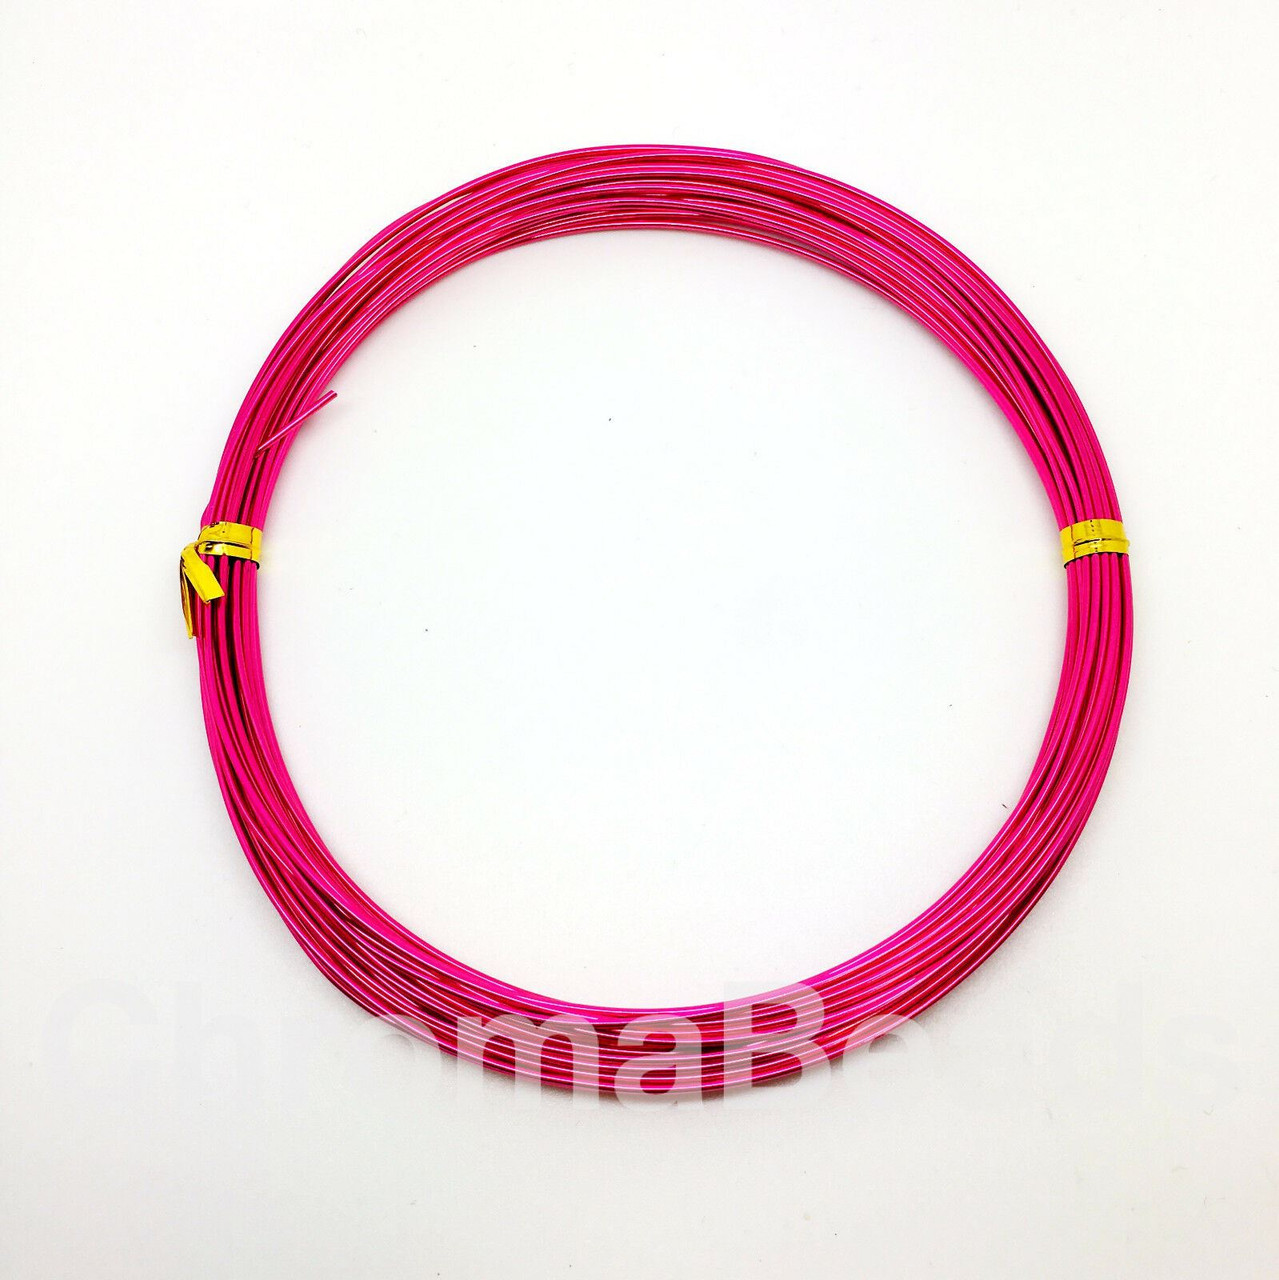 10m Aluminium Wire, 1.0mm thick - Hot Pink